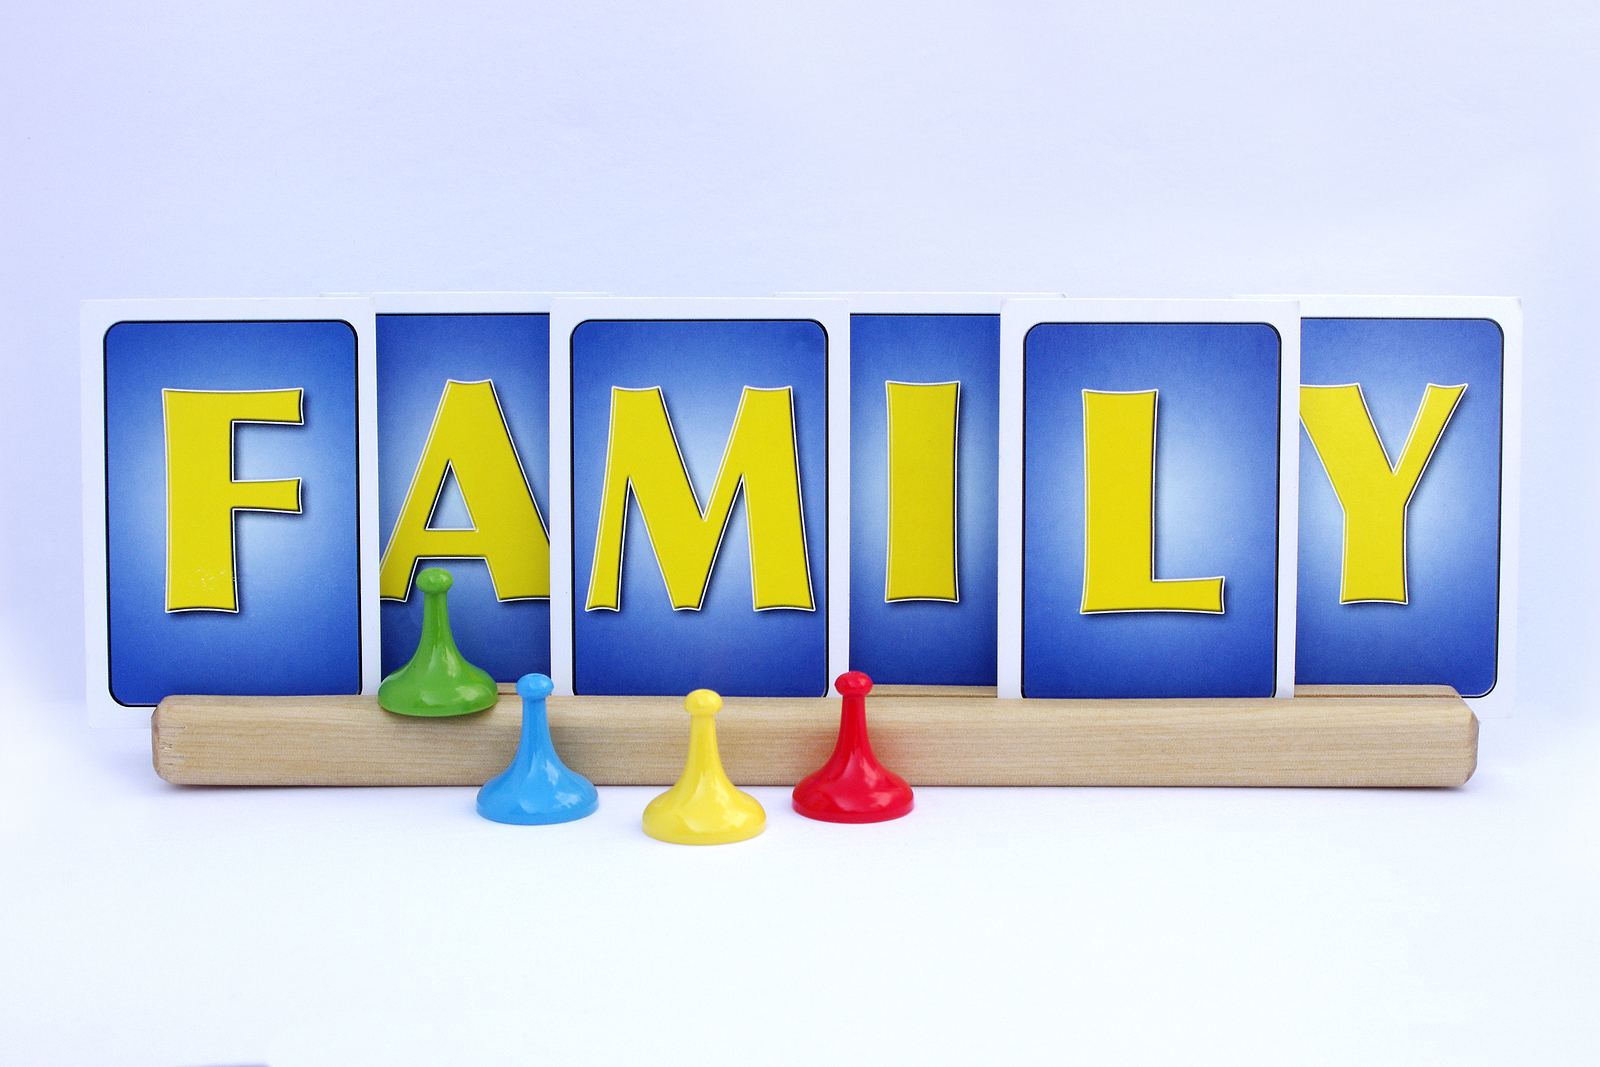 family games